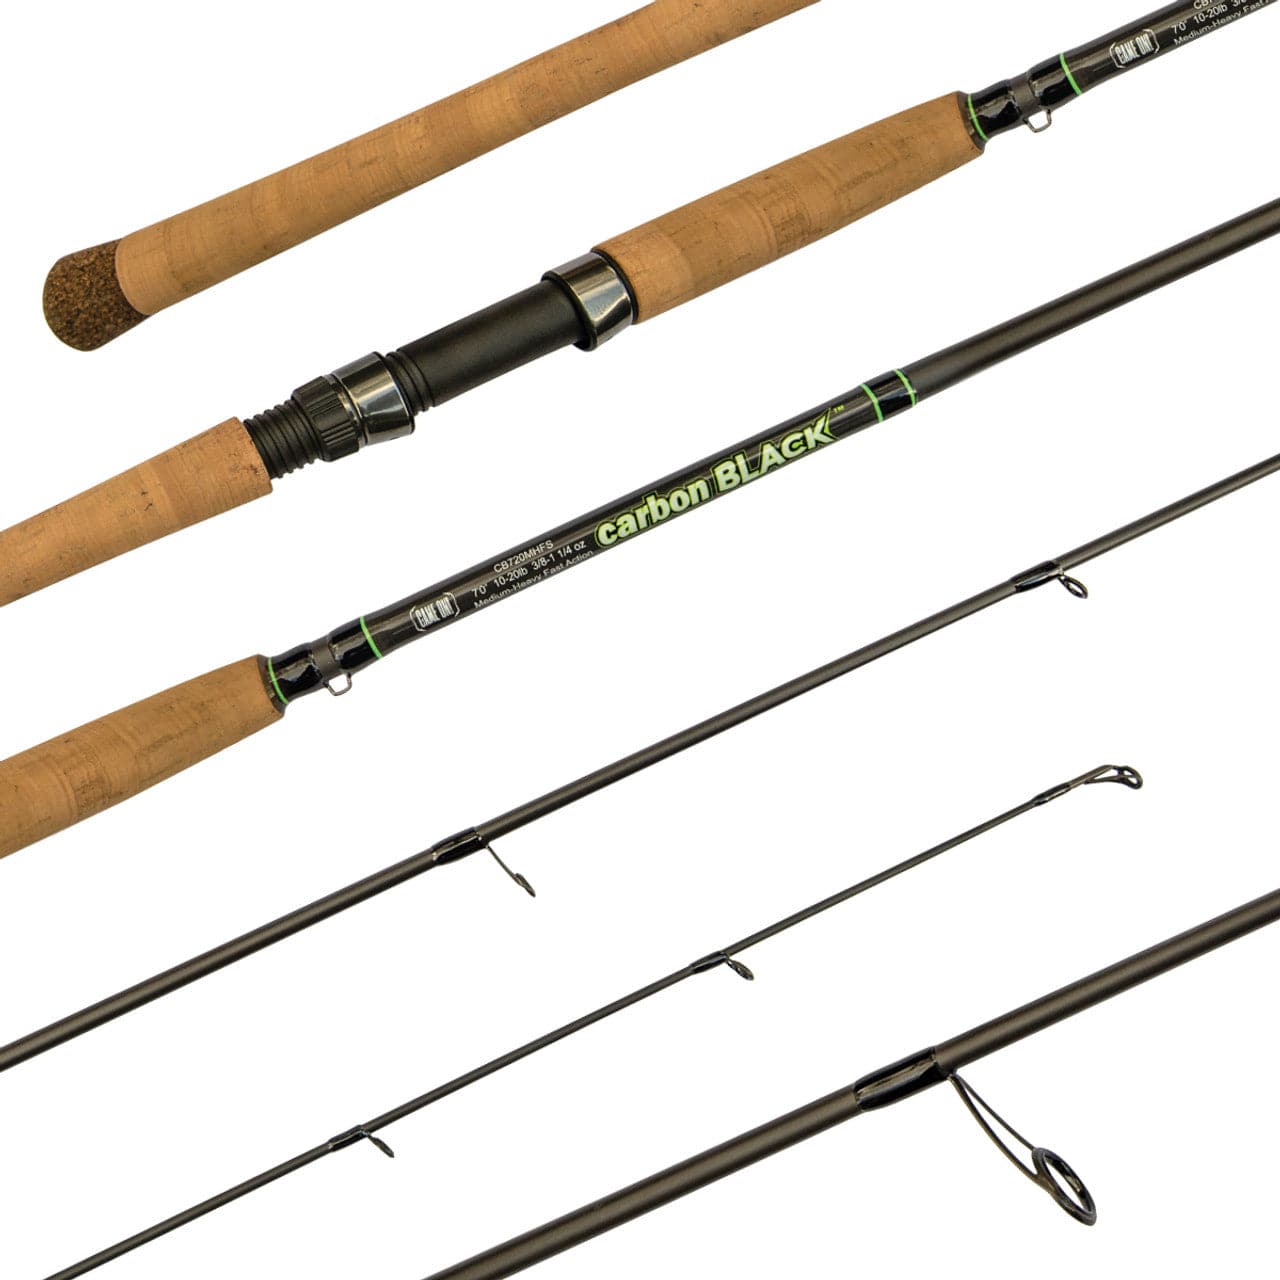 Game On! Carbon Black Inshore Rods - The Saltwater Edge